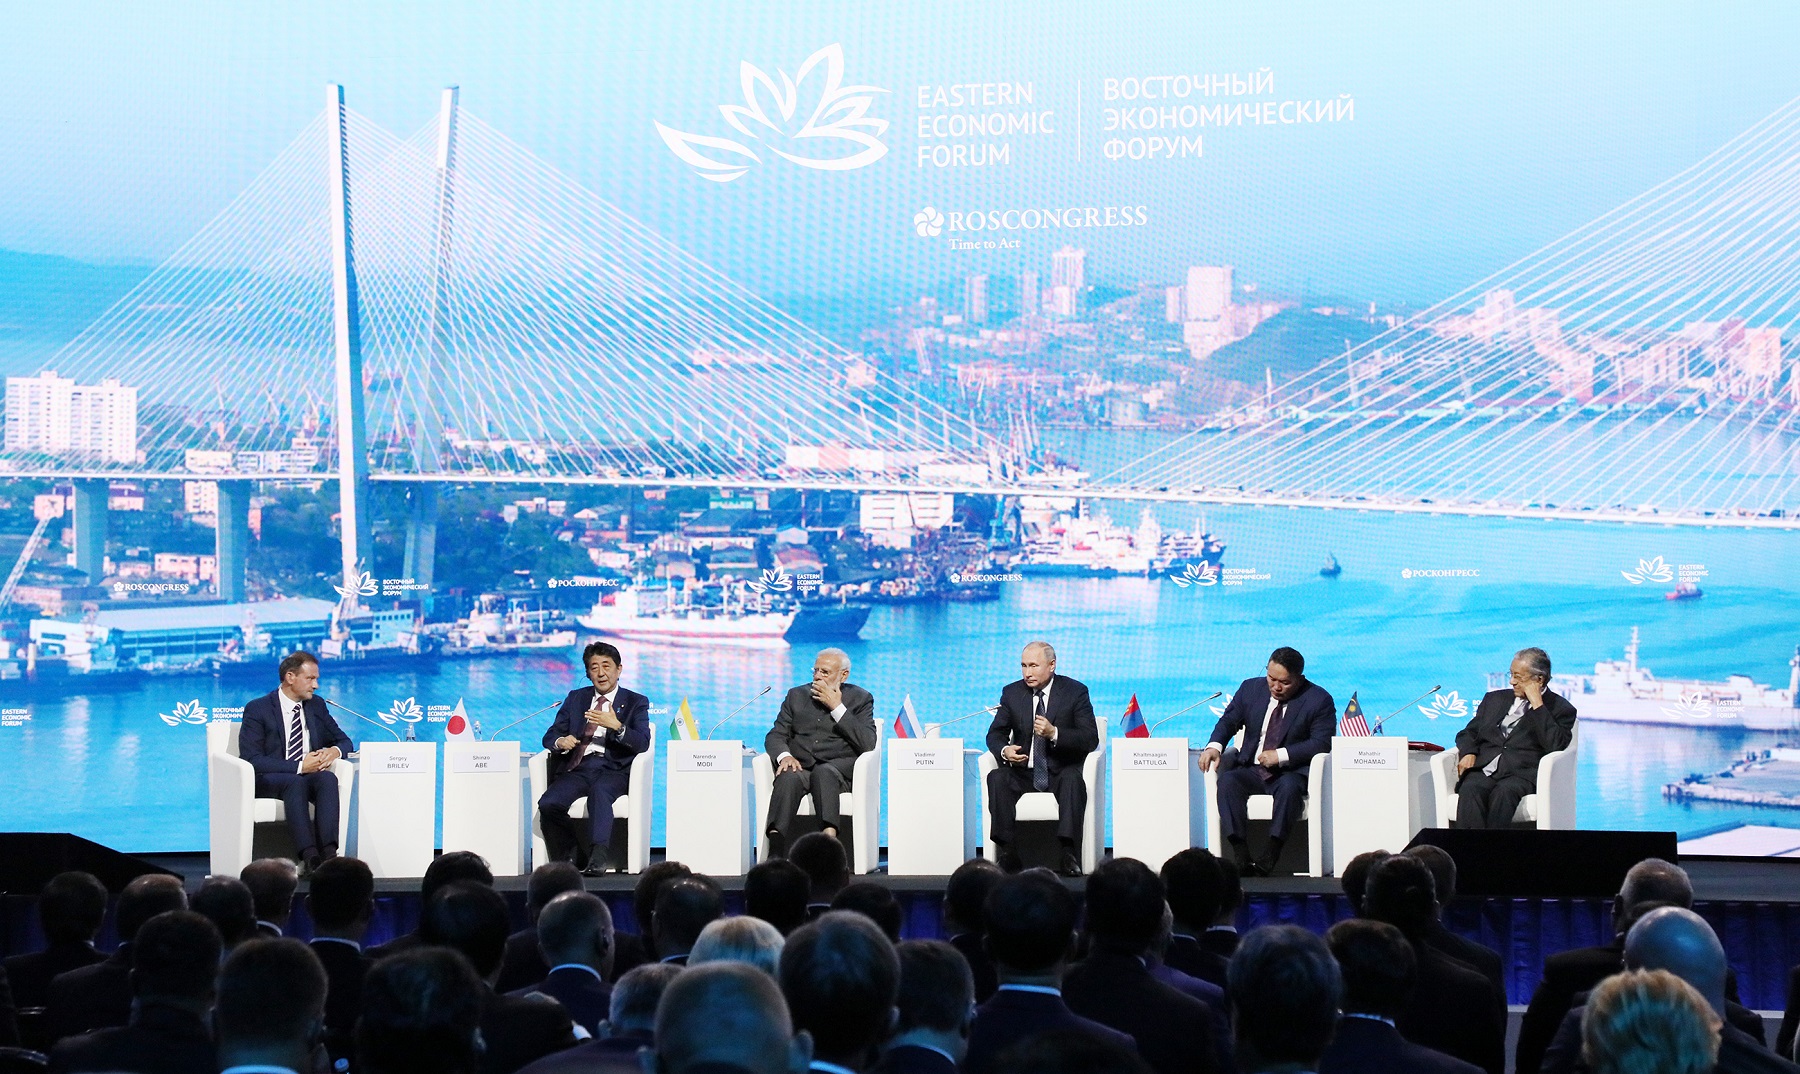 Photograph of the Plenary Session of the Eastern Economic Forum (1)